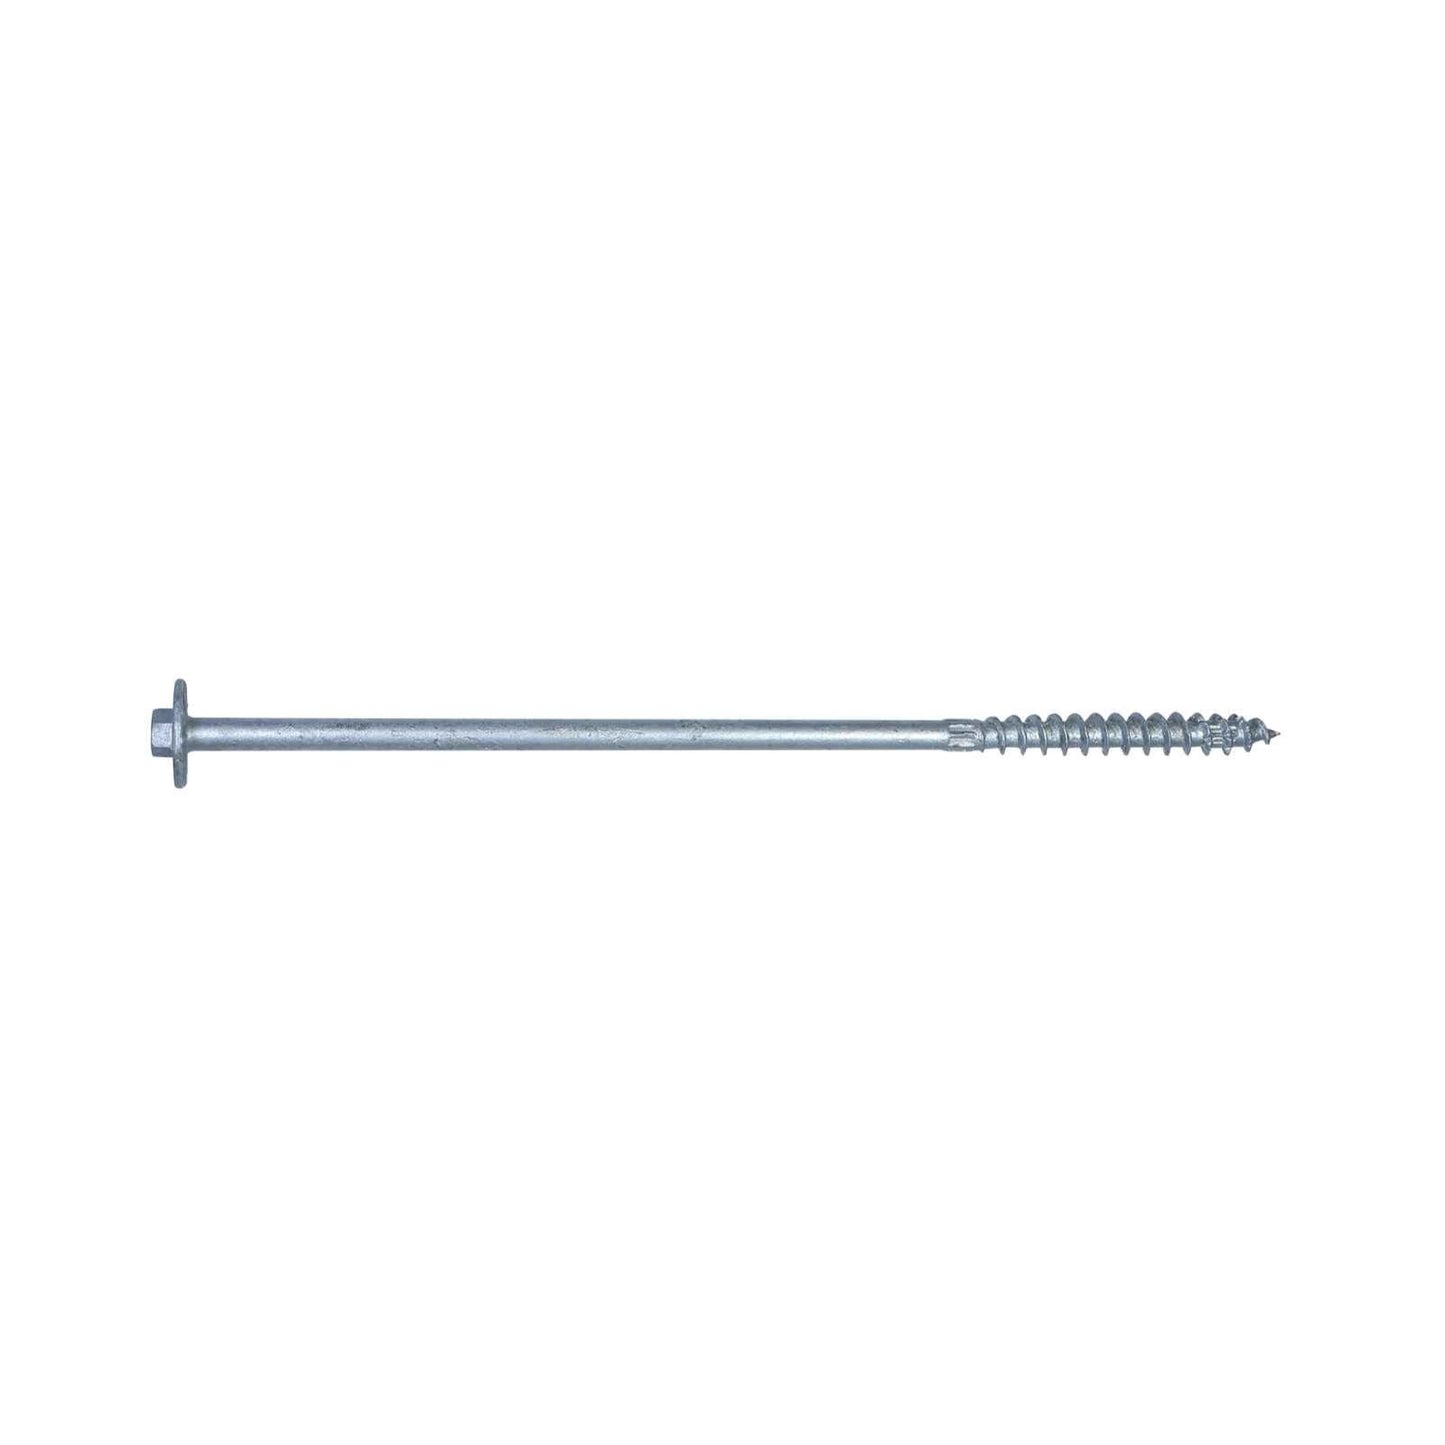 0276 inch x 10 inch StrongTie SDWH Timber Screw Hot Dipped Galvanized Pkg 30